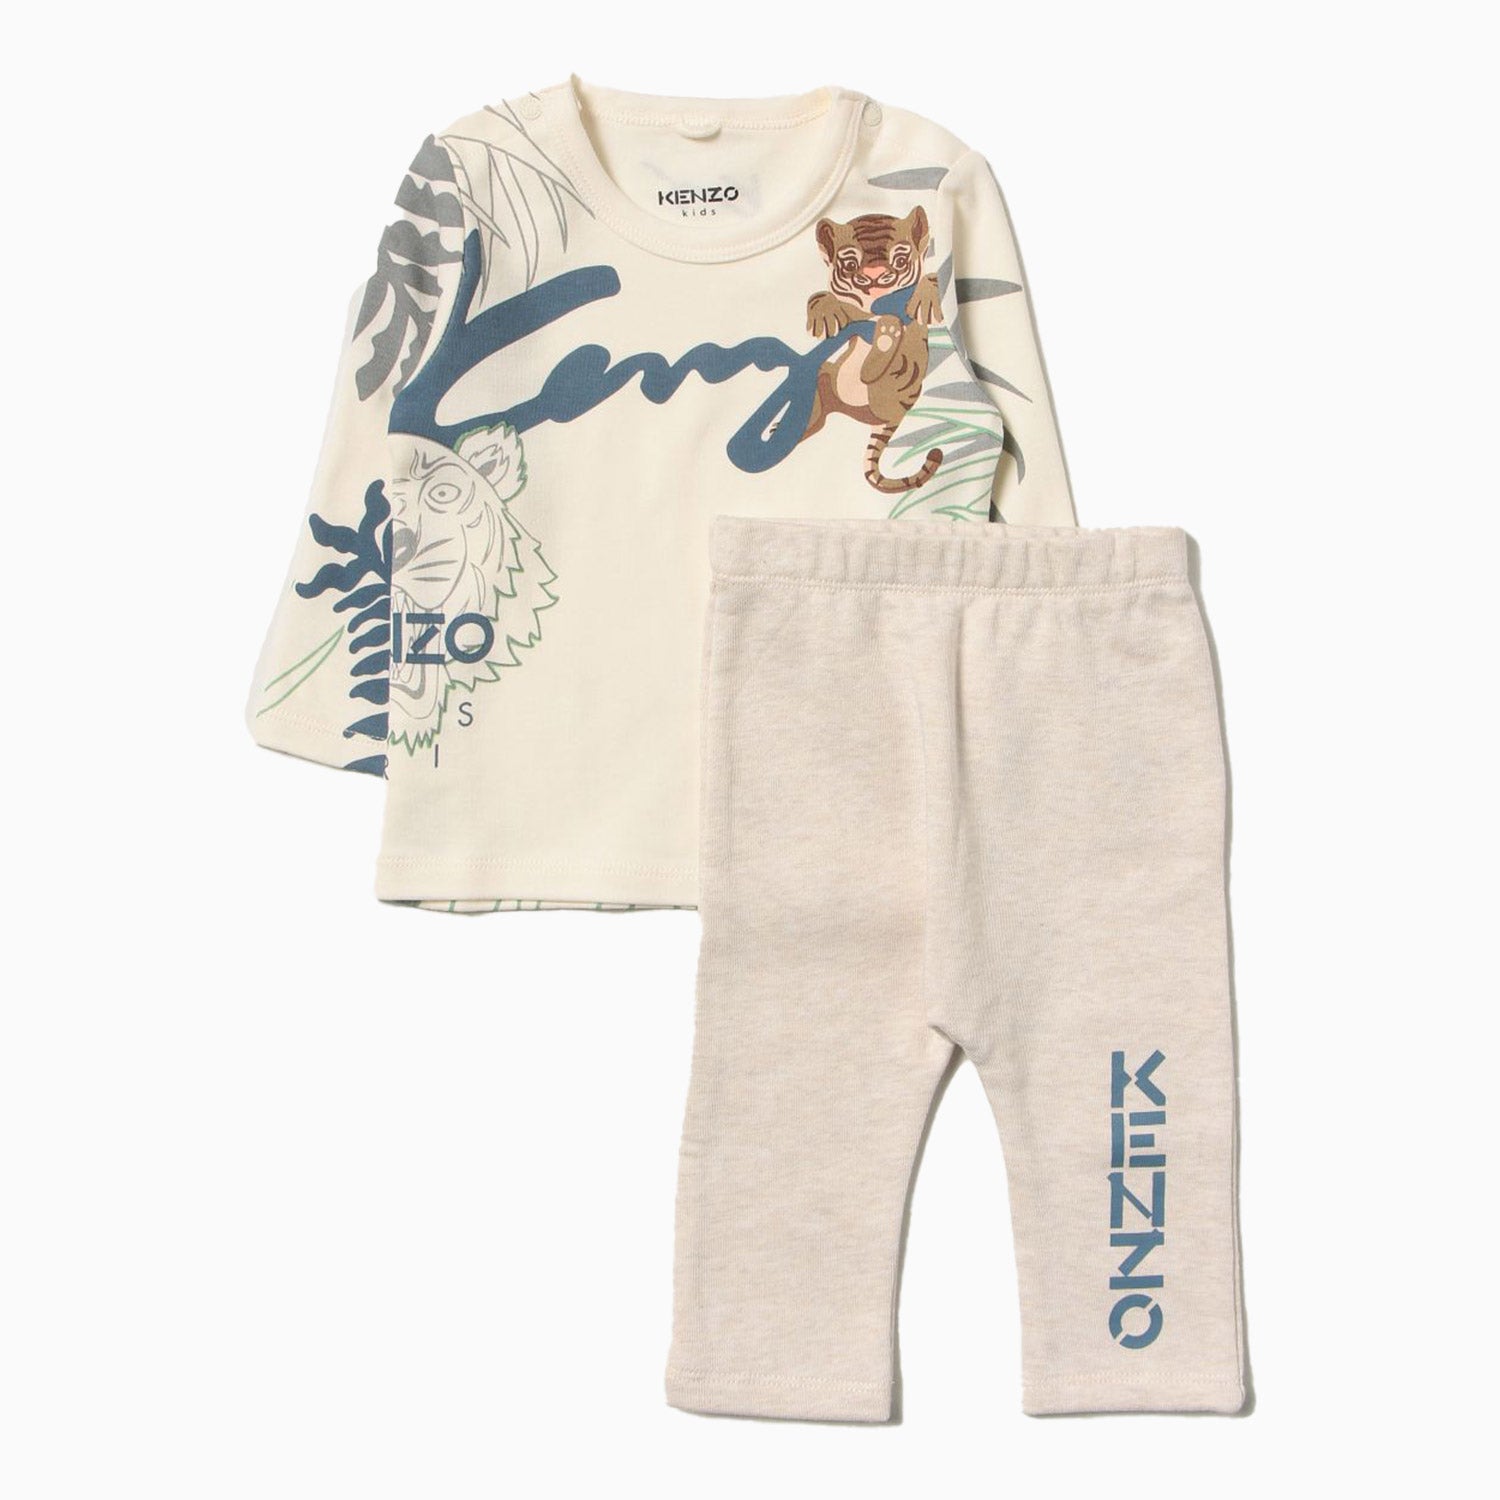 Kenzo Kid's Jungle Print Outfit - Color: Off White - Kids Premium Clothing -